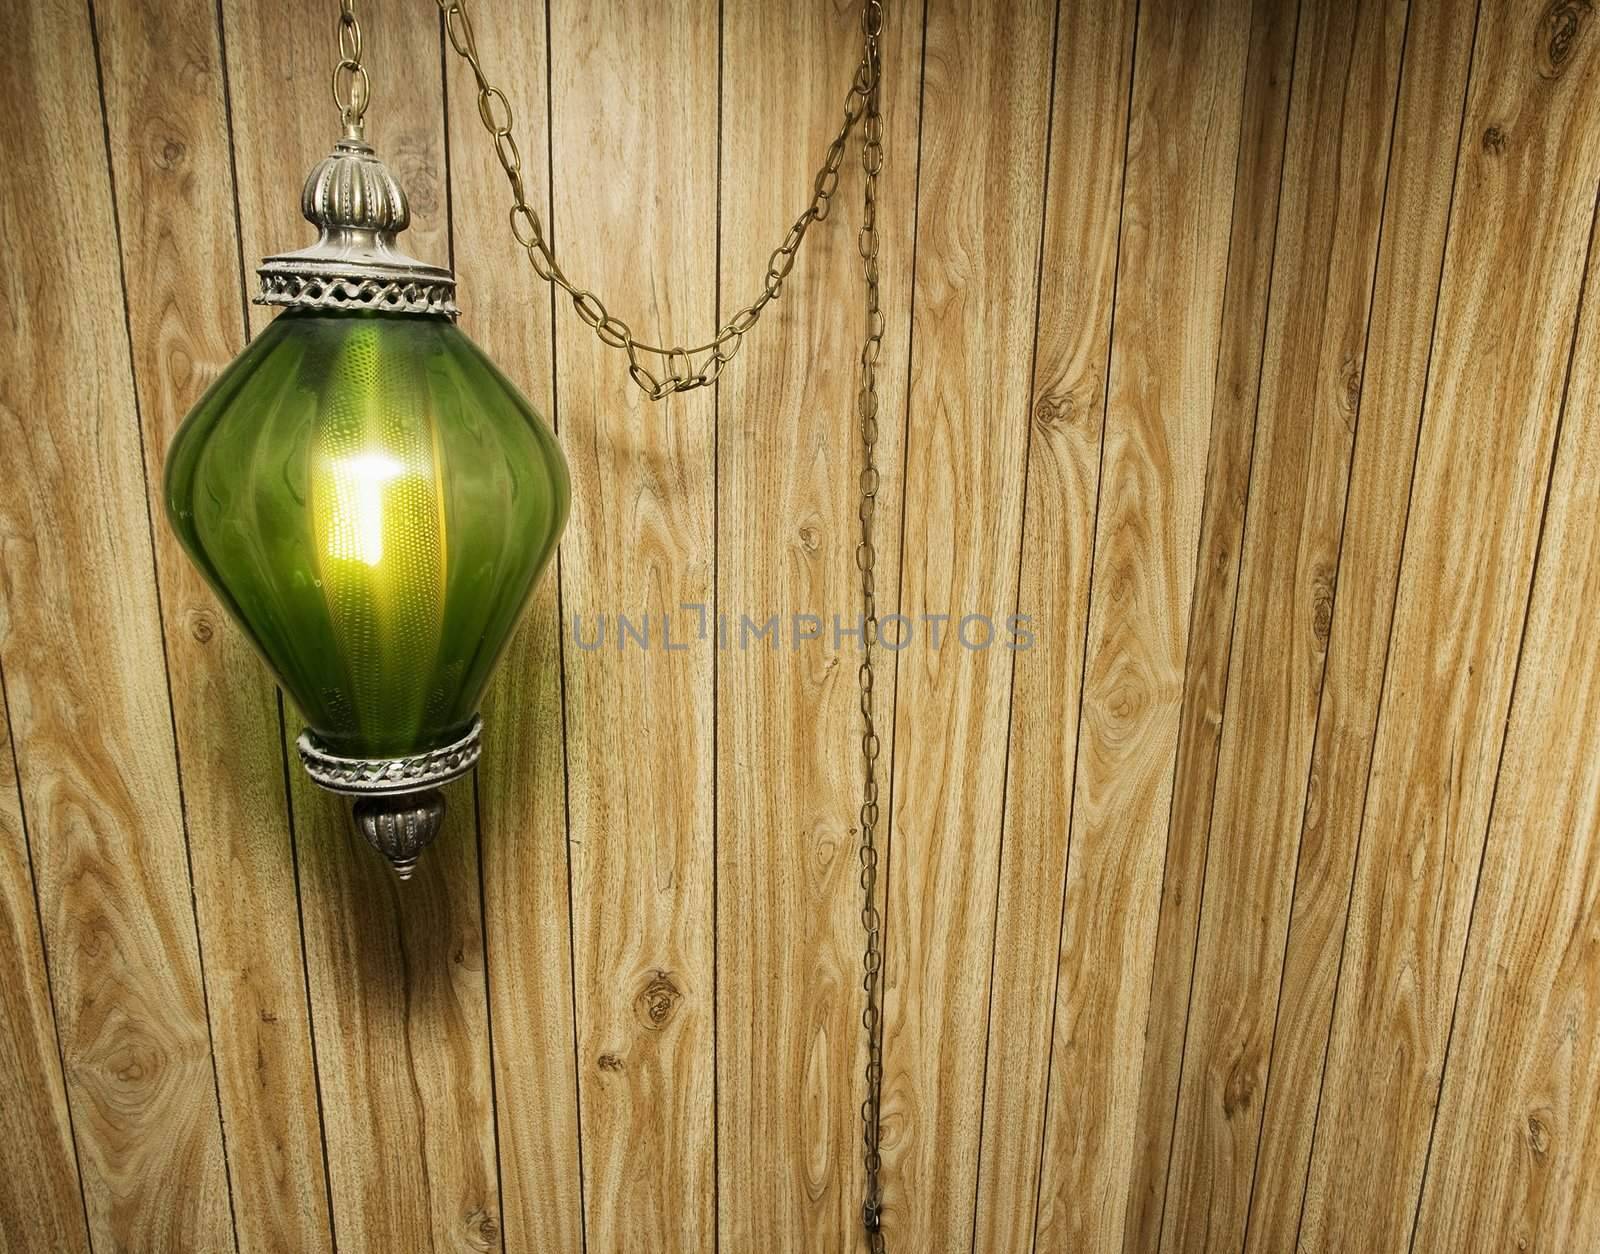 Wood Paneling and Hanging Lamp by Creatista